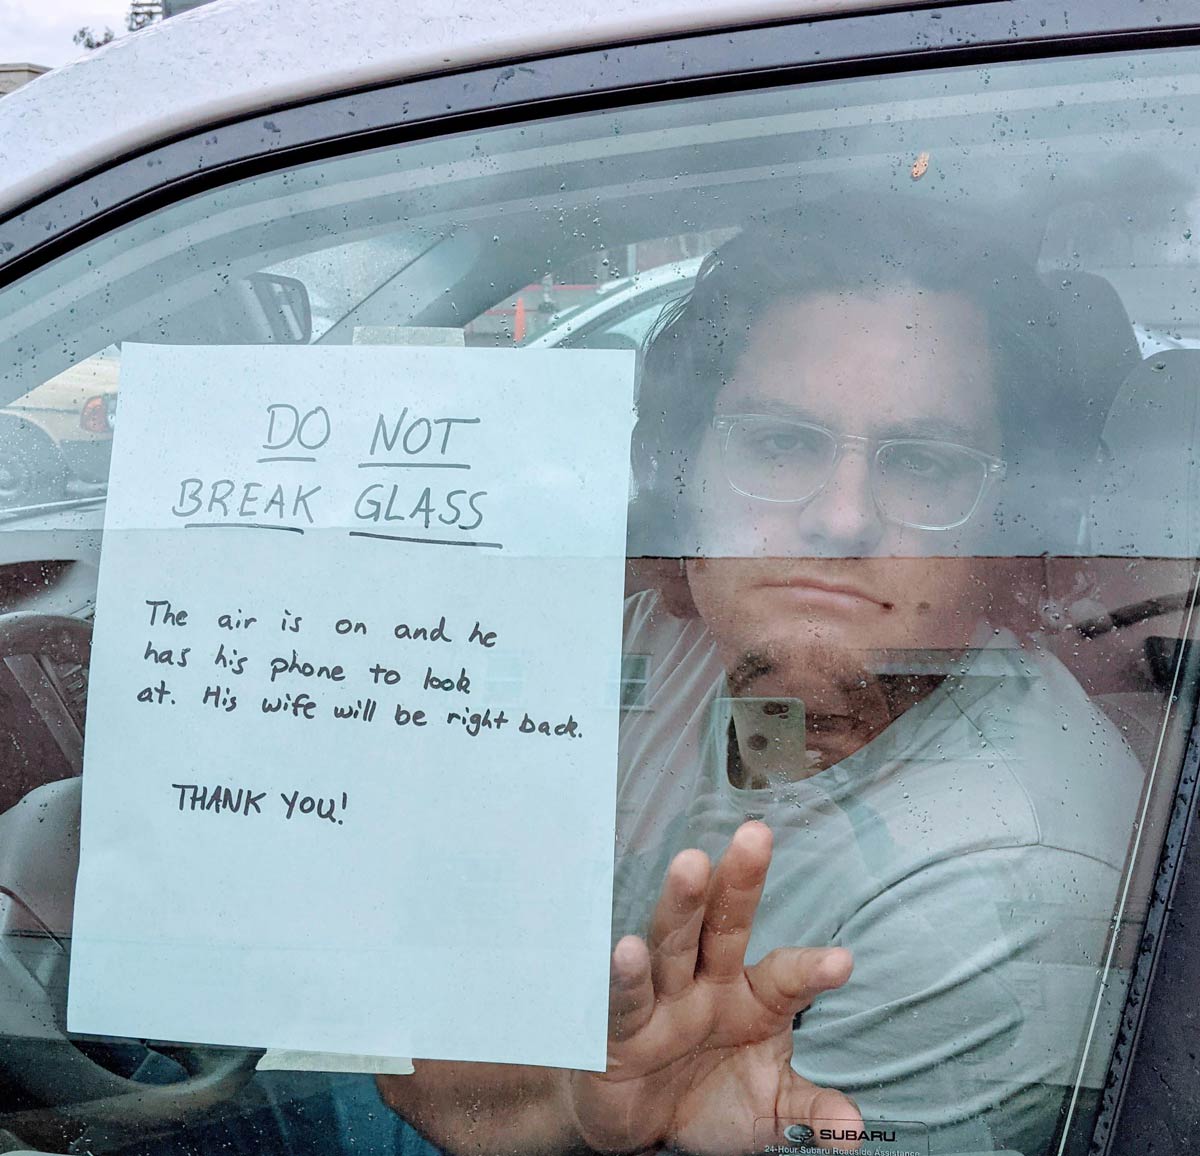 My wife has had the virus and I haven't, so she makes me wait in the car when we get groceries. I made a sign